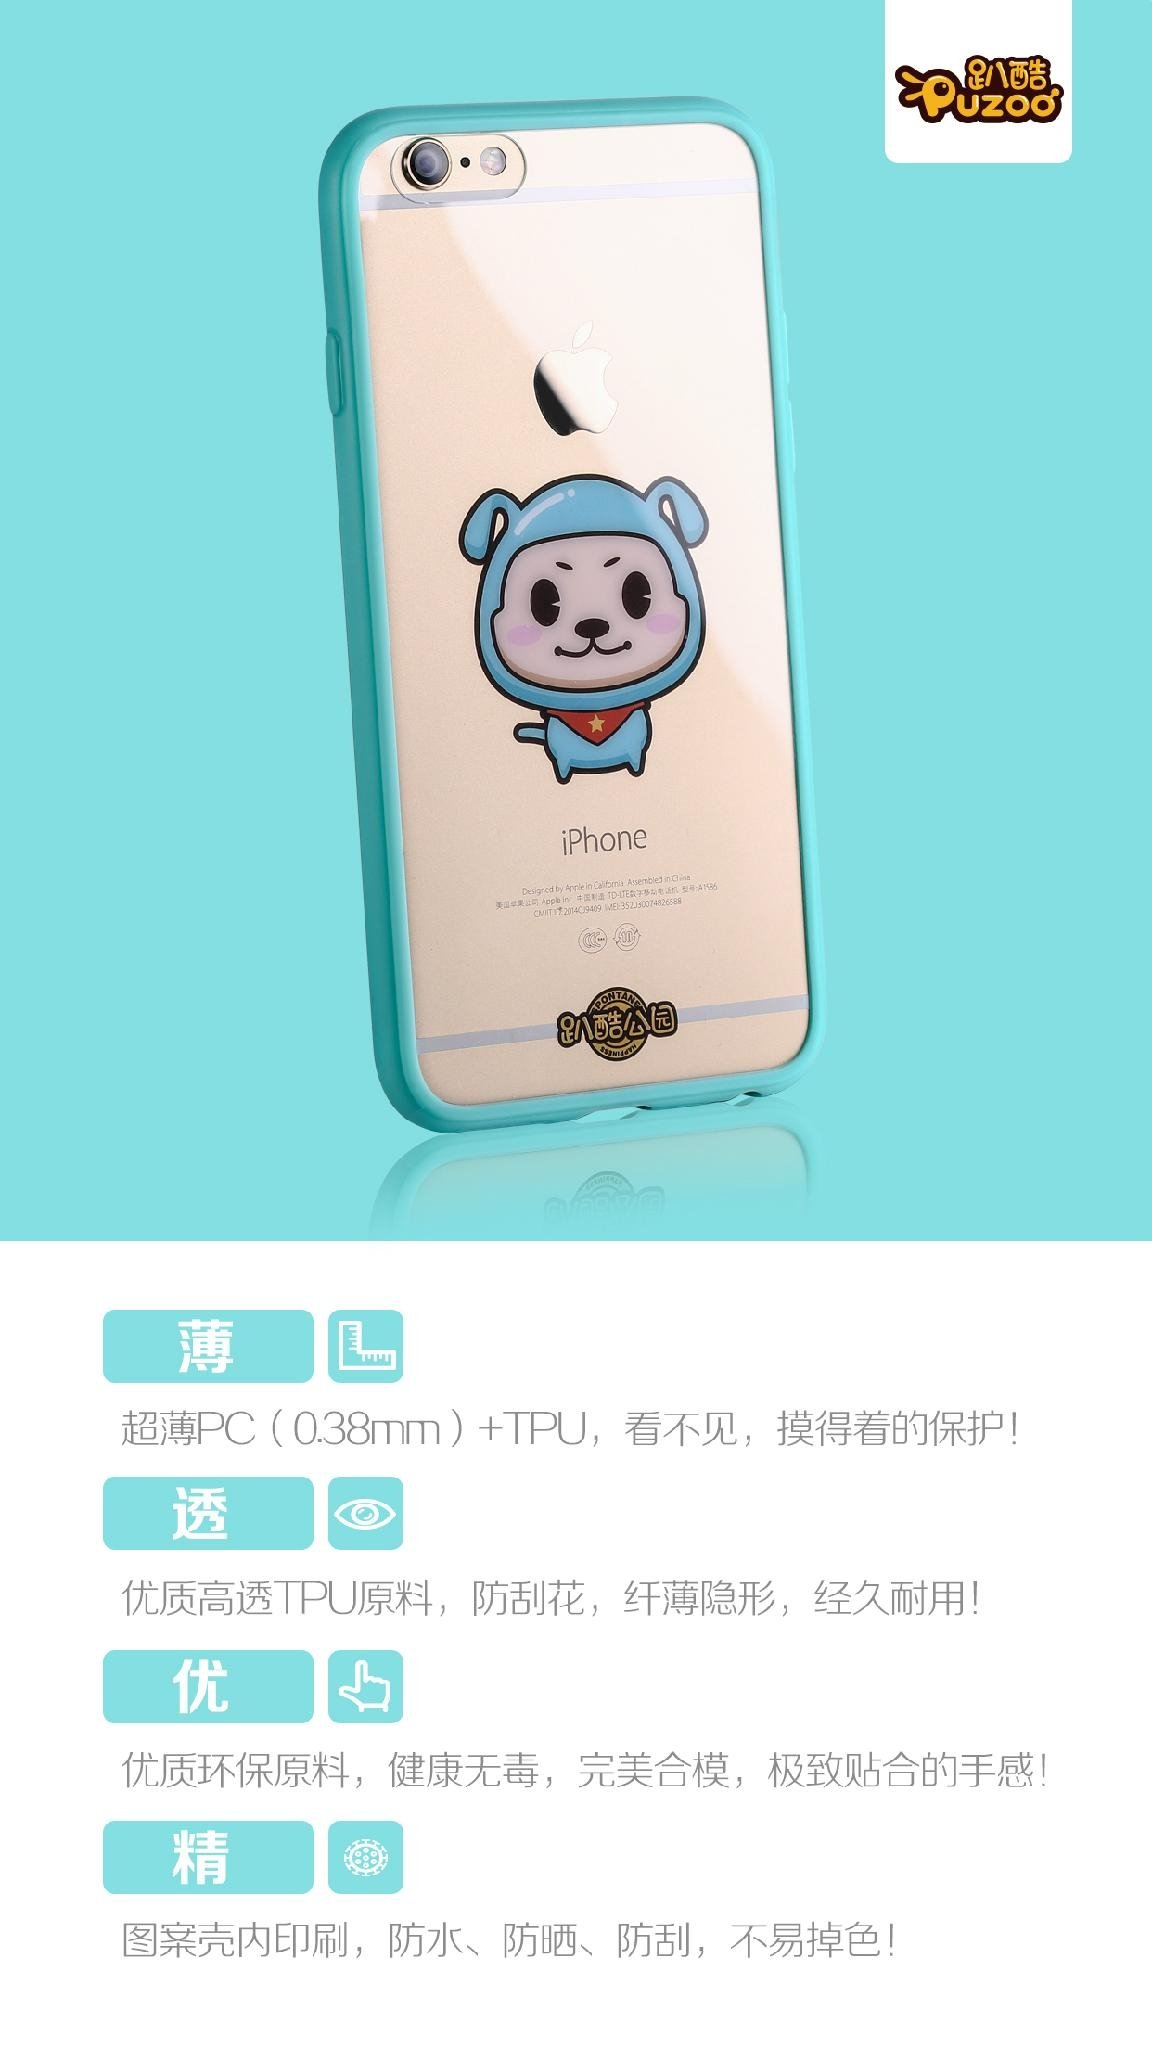 PUZOO New Arrival Cute mobile phone cover for iphone 6/6s Plus